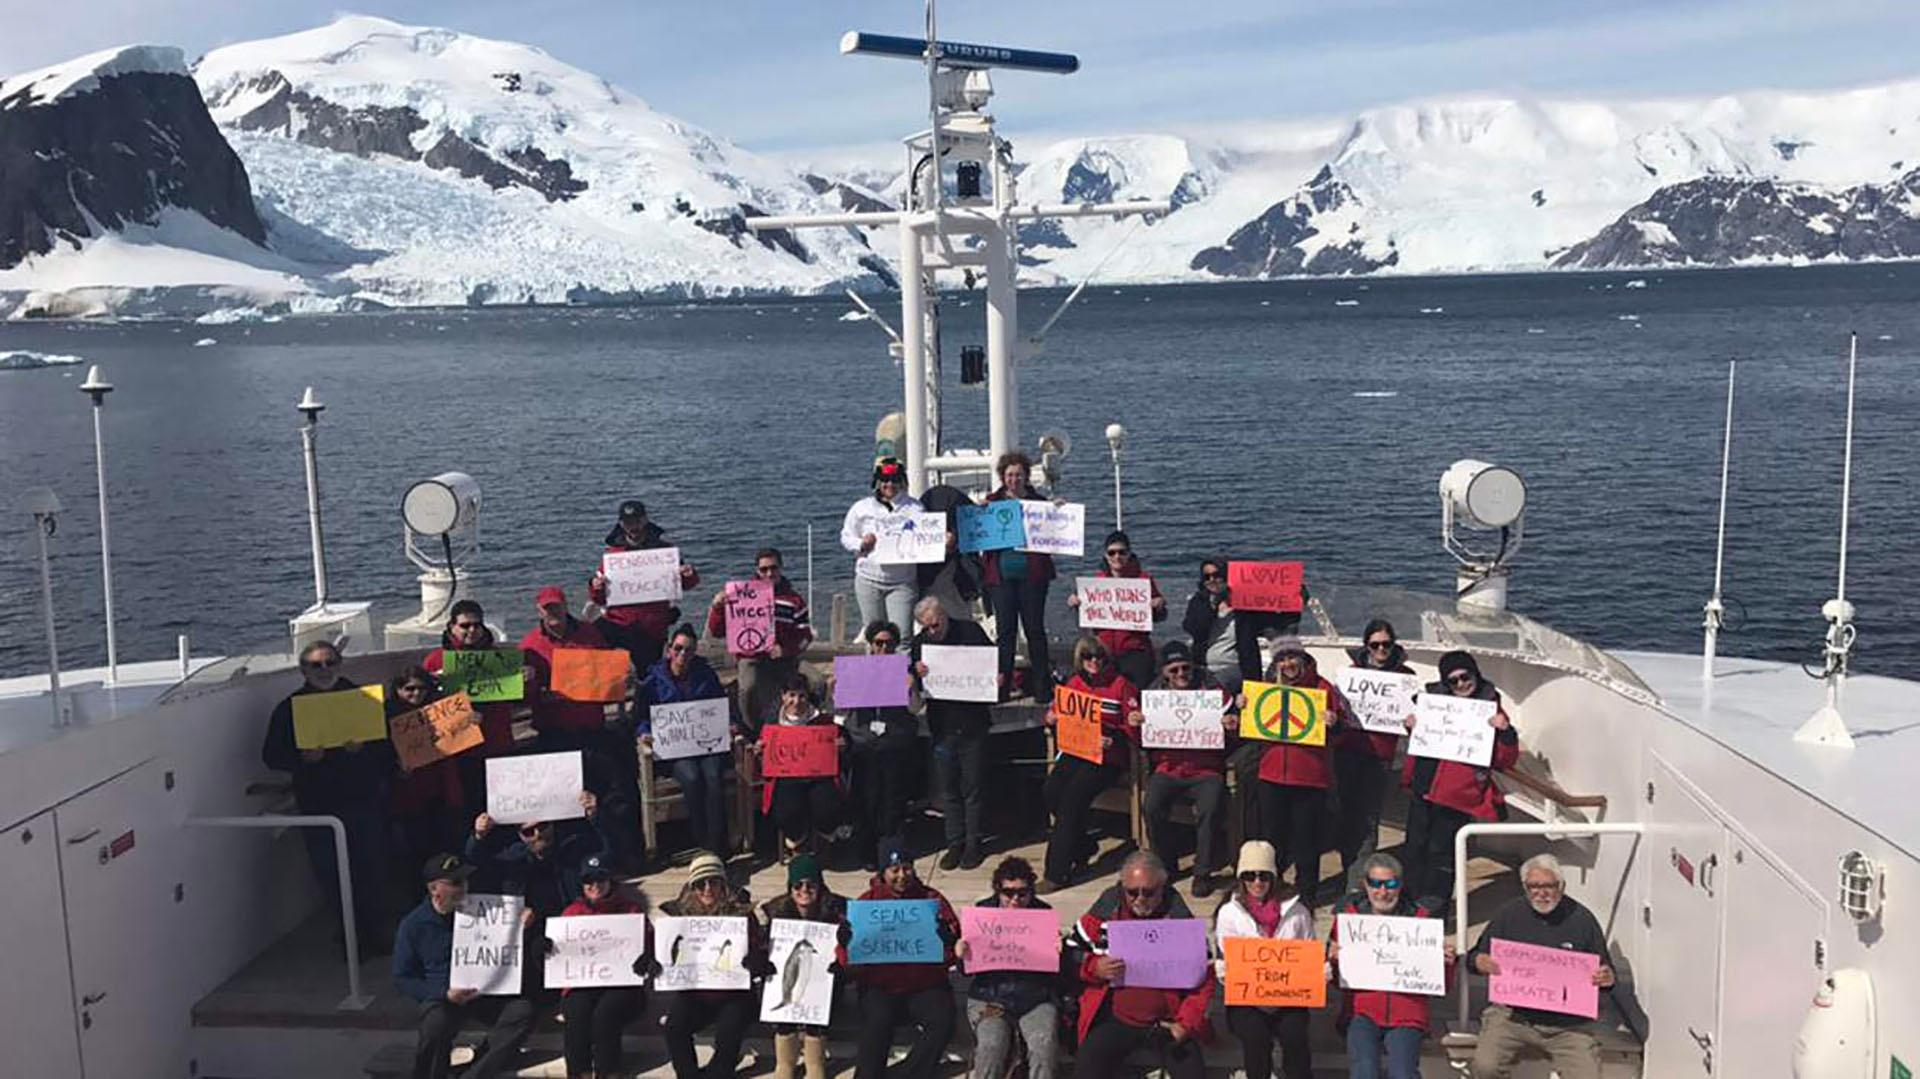 A "sister" Women’s March in Antarctica in 2017.